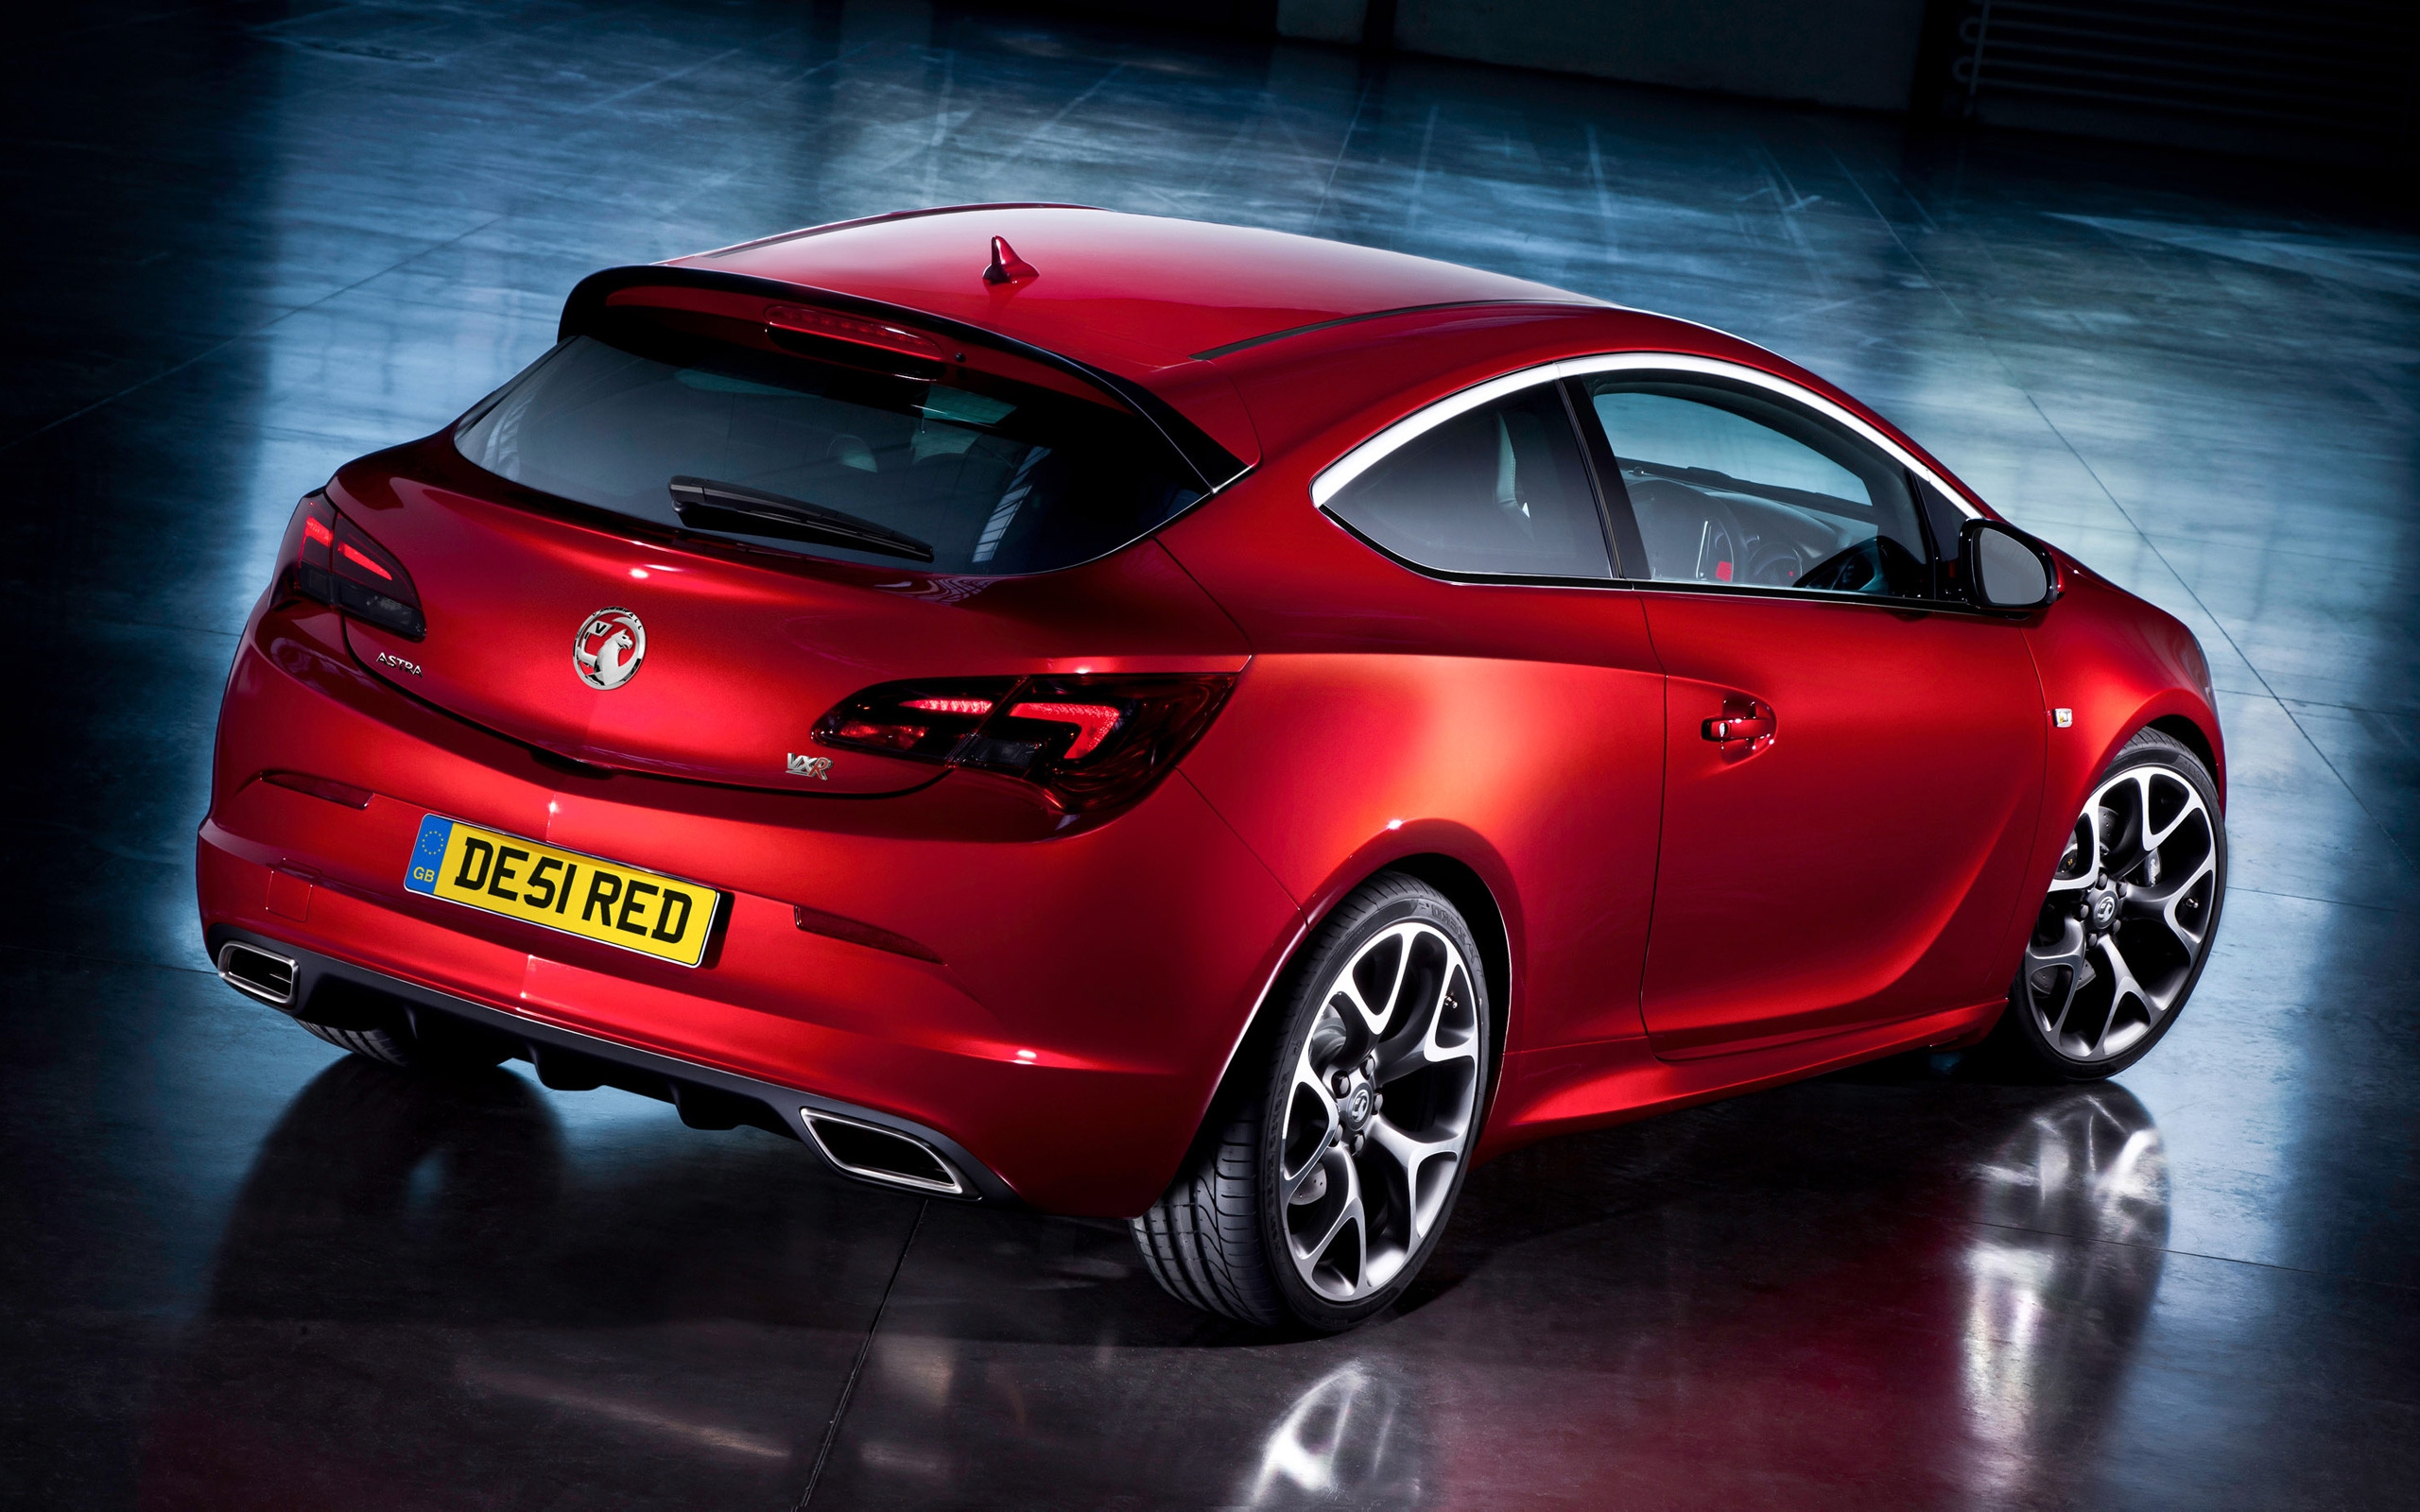 Vauxhall Astra GTC Rear for 2560 x 1600 widescreen resolution